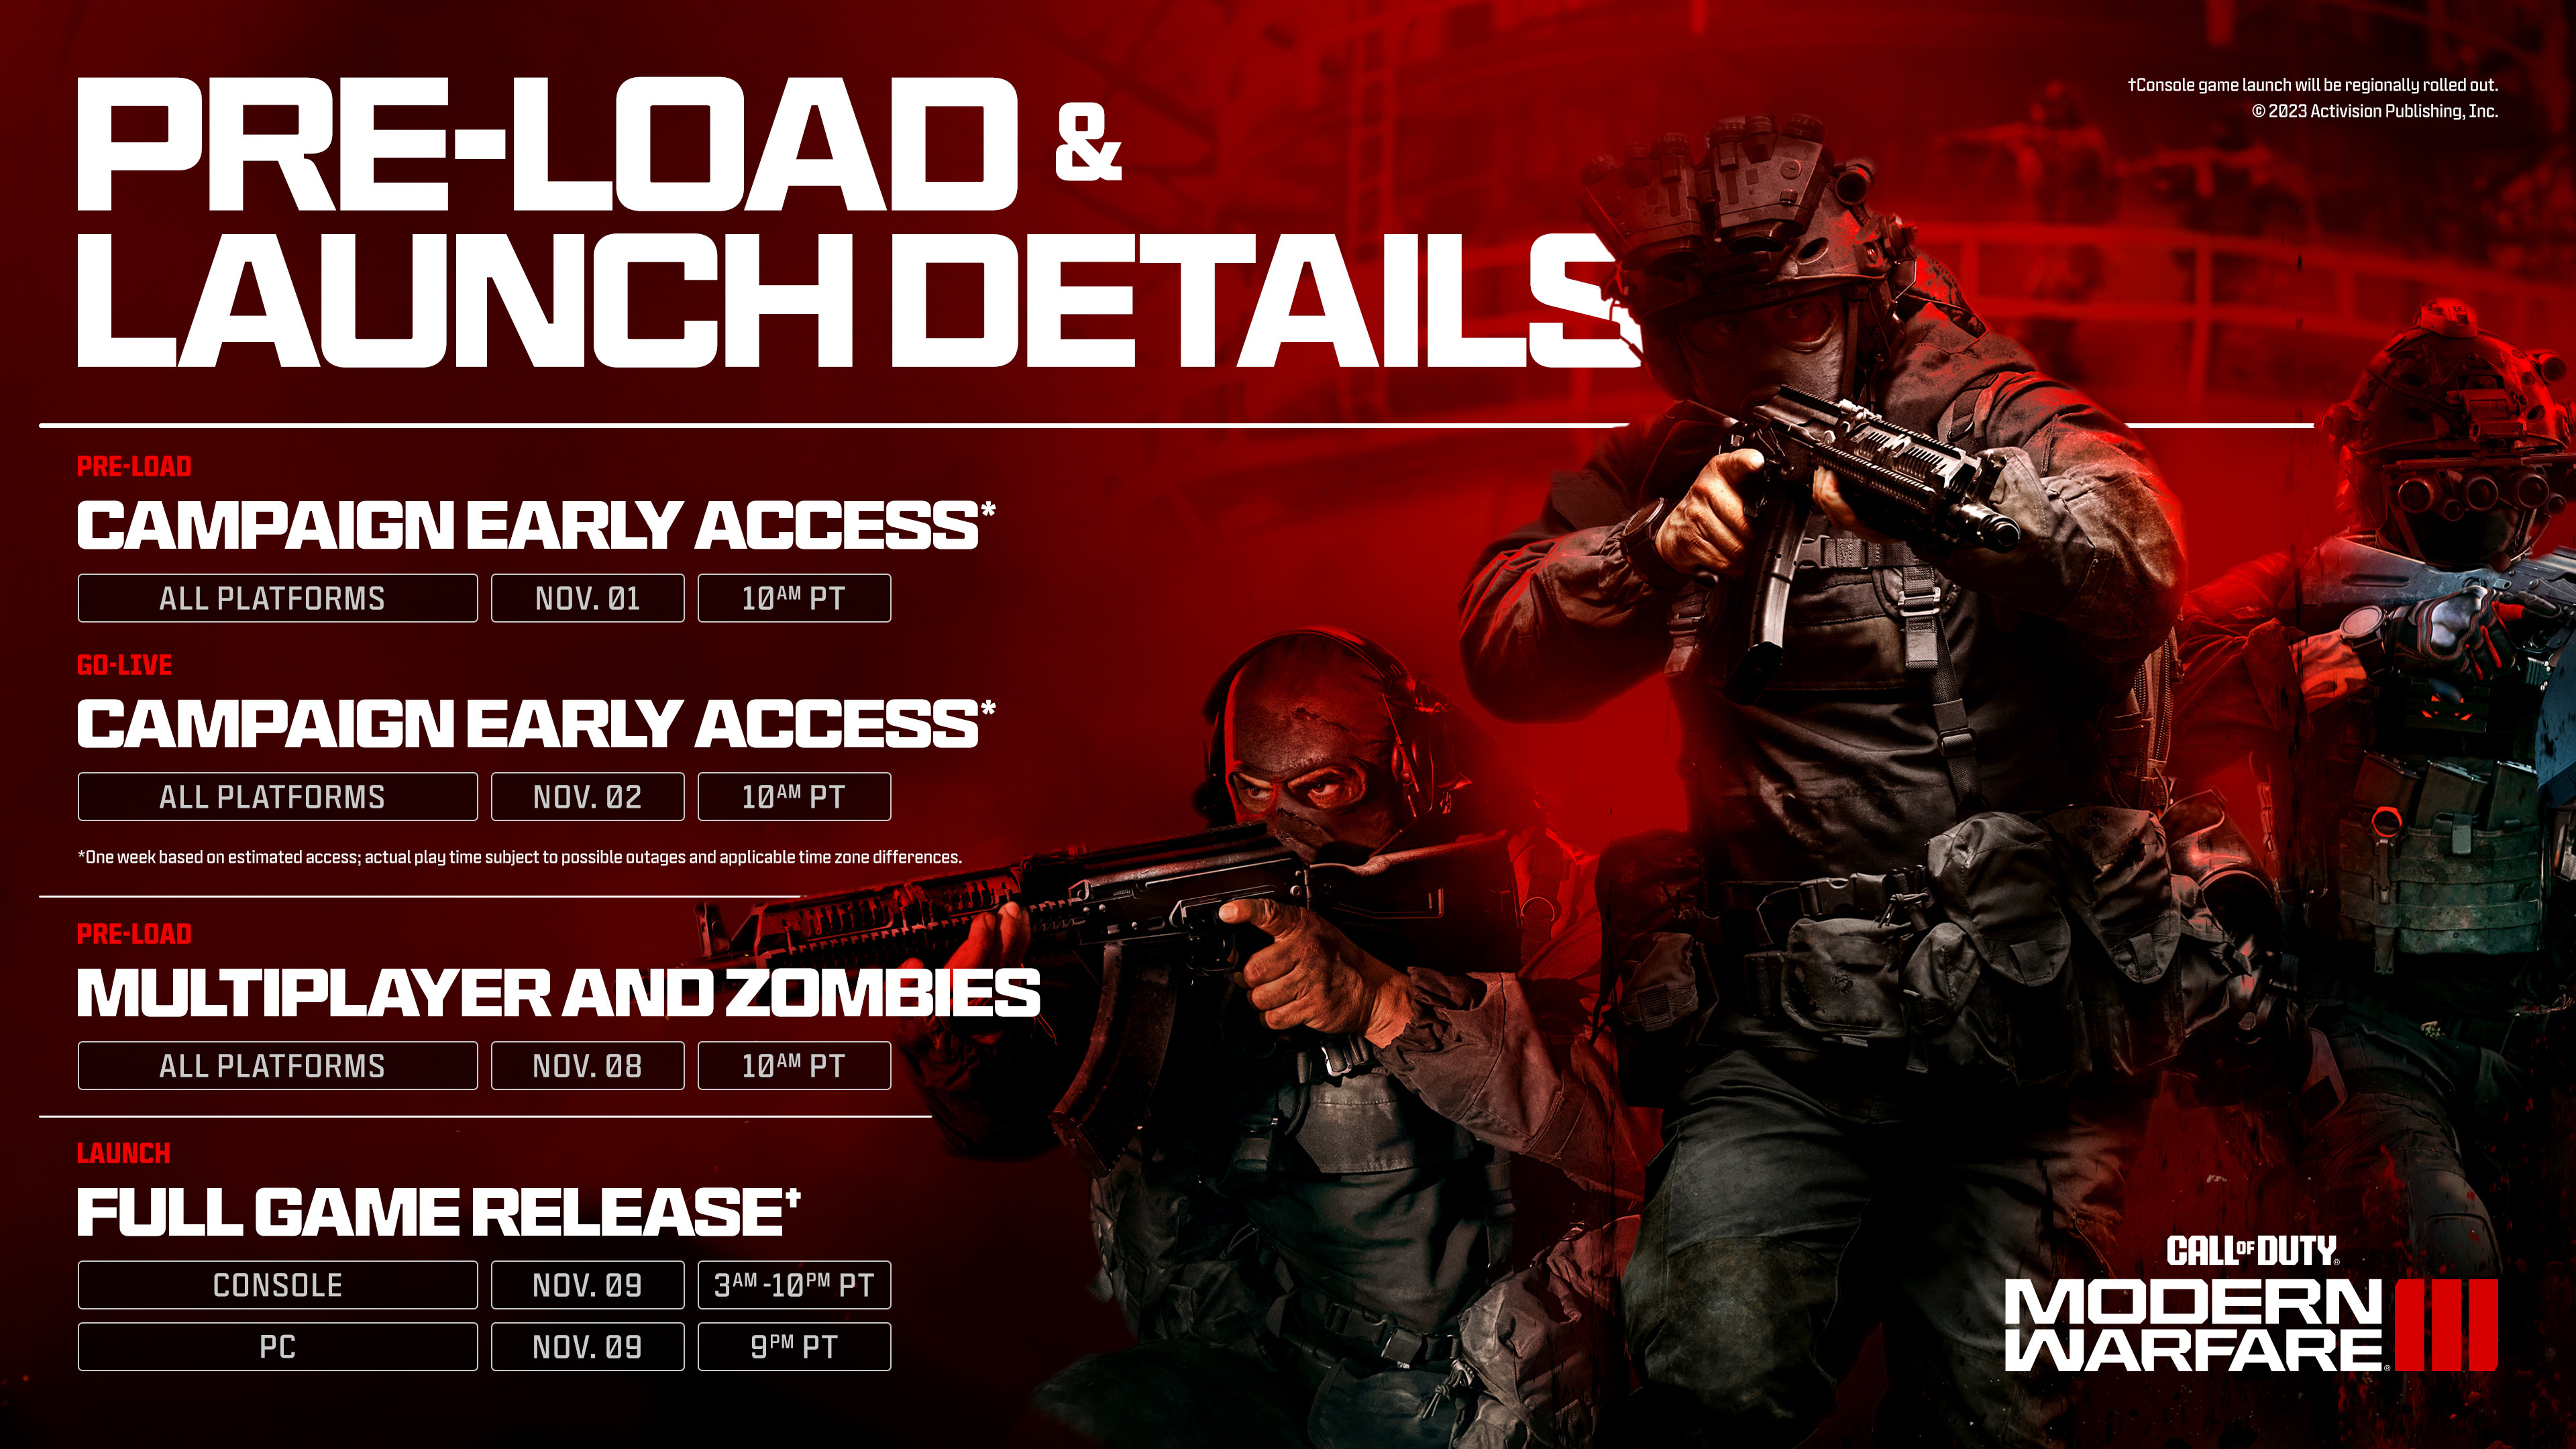 Call of Duty on X: #MW3 pre-load details are here 🔥 Tell the